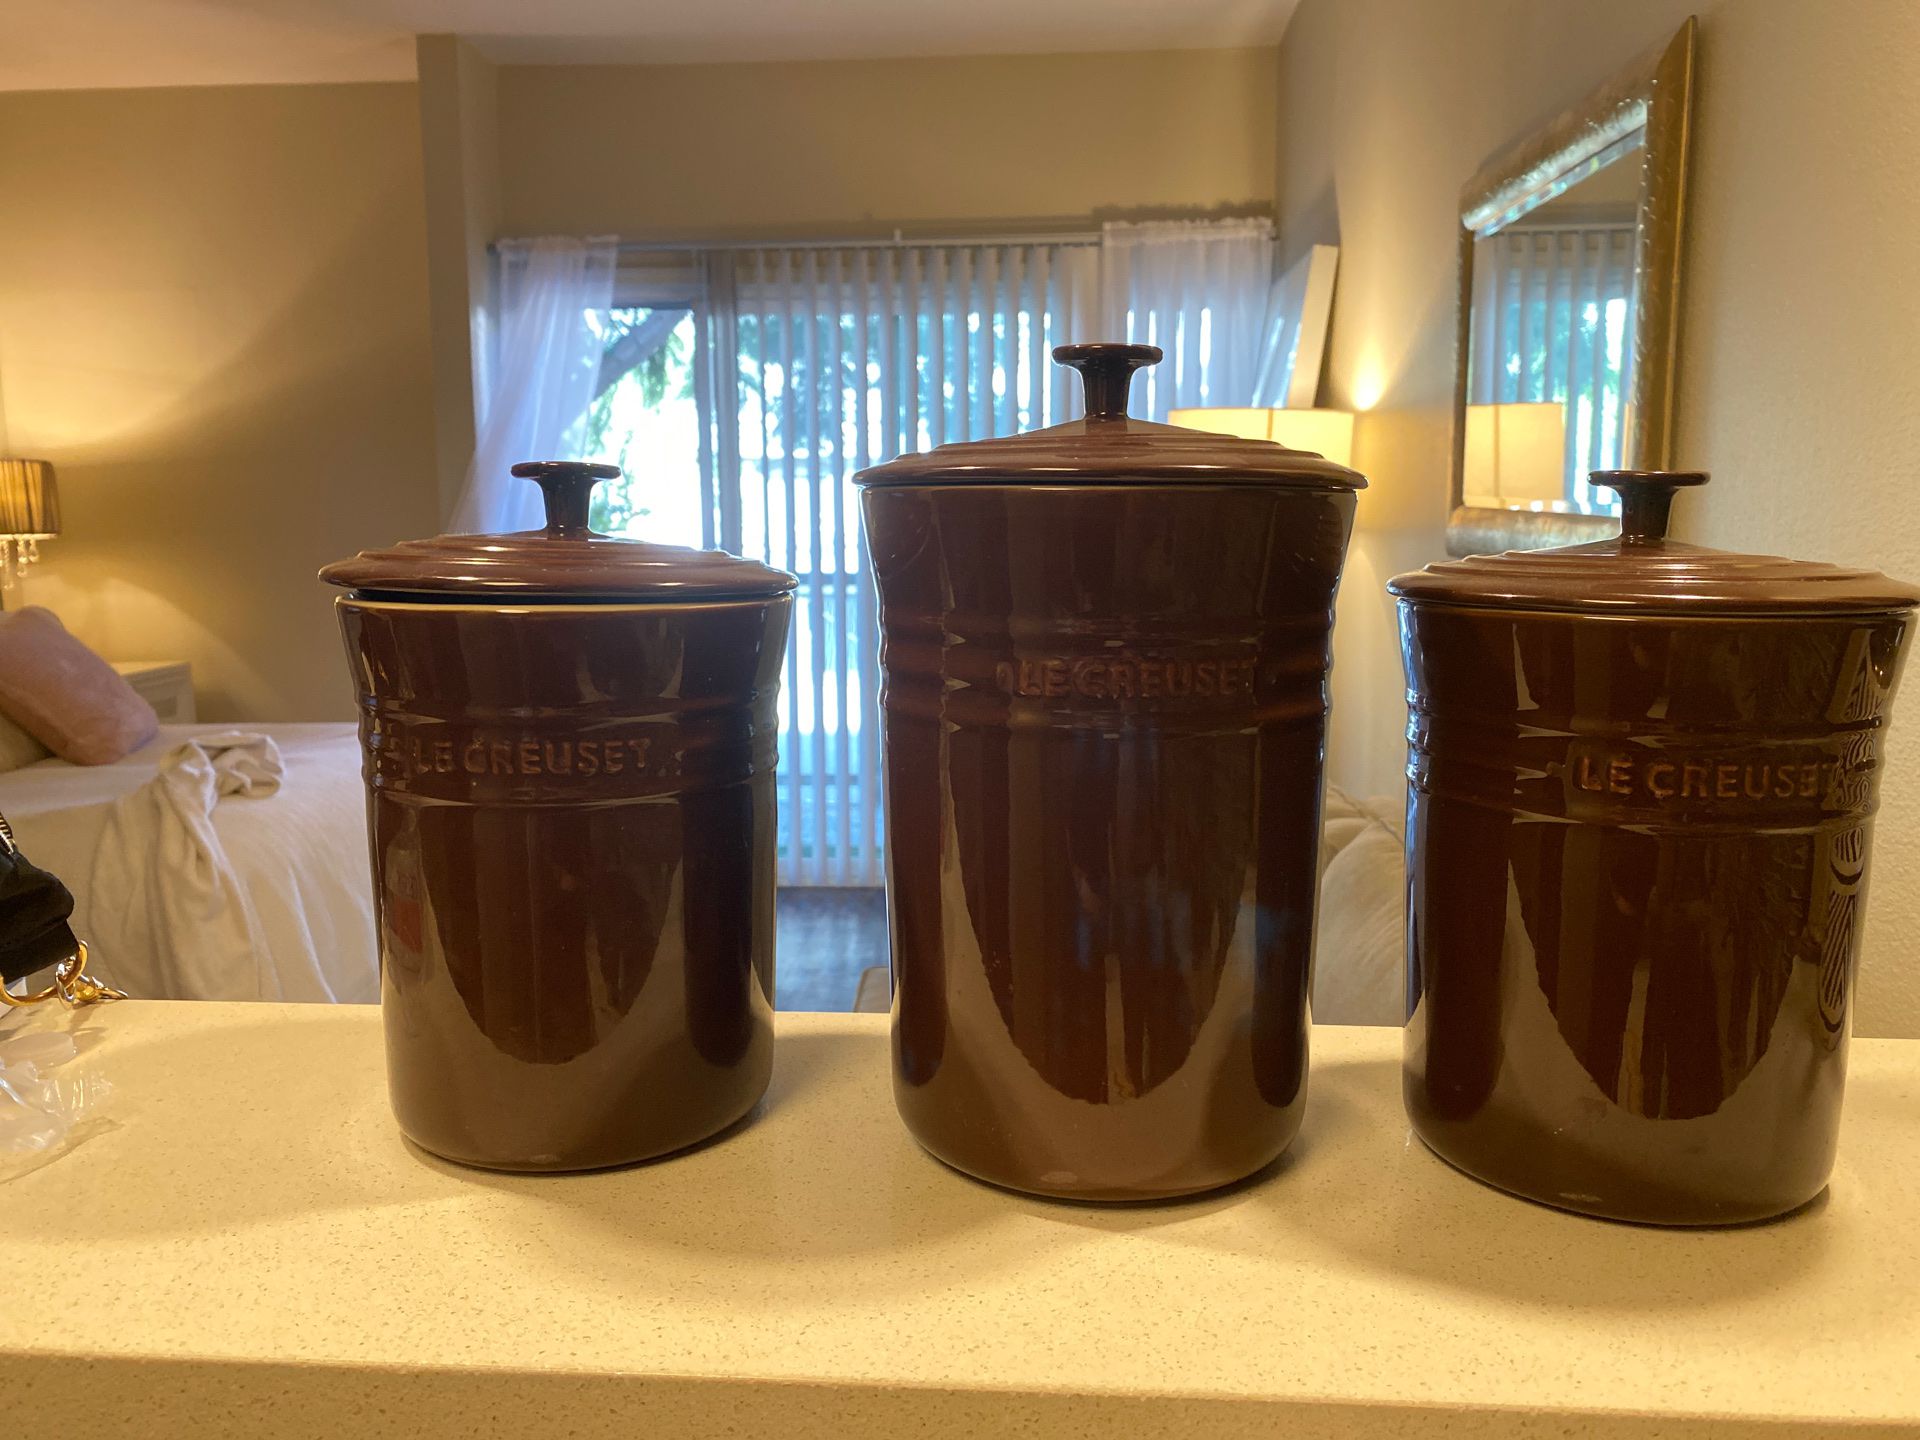 Le Creuset canisters